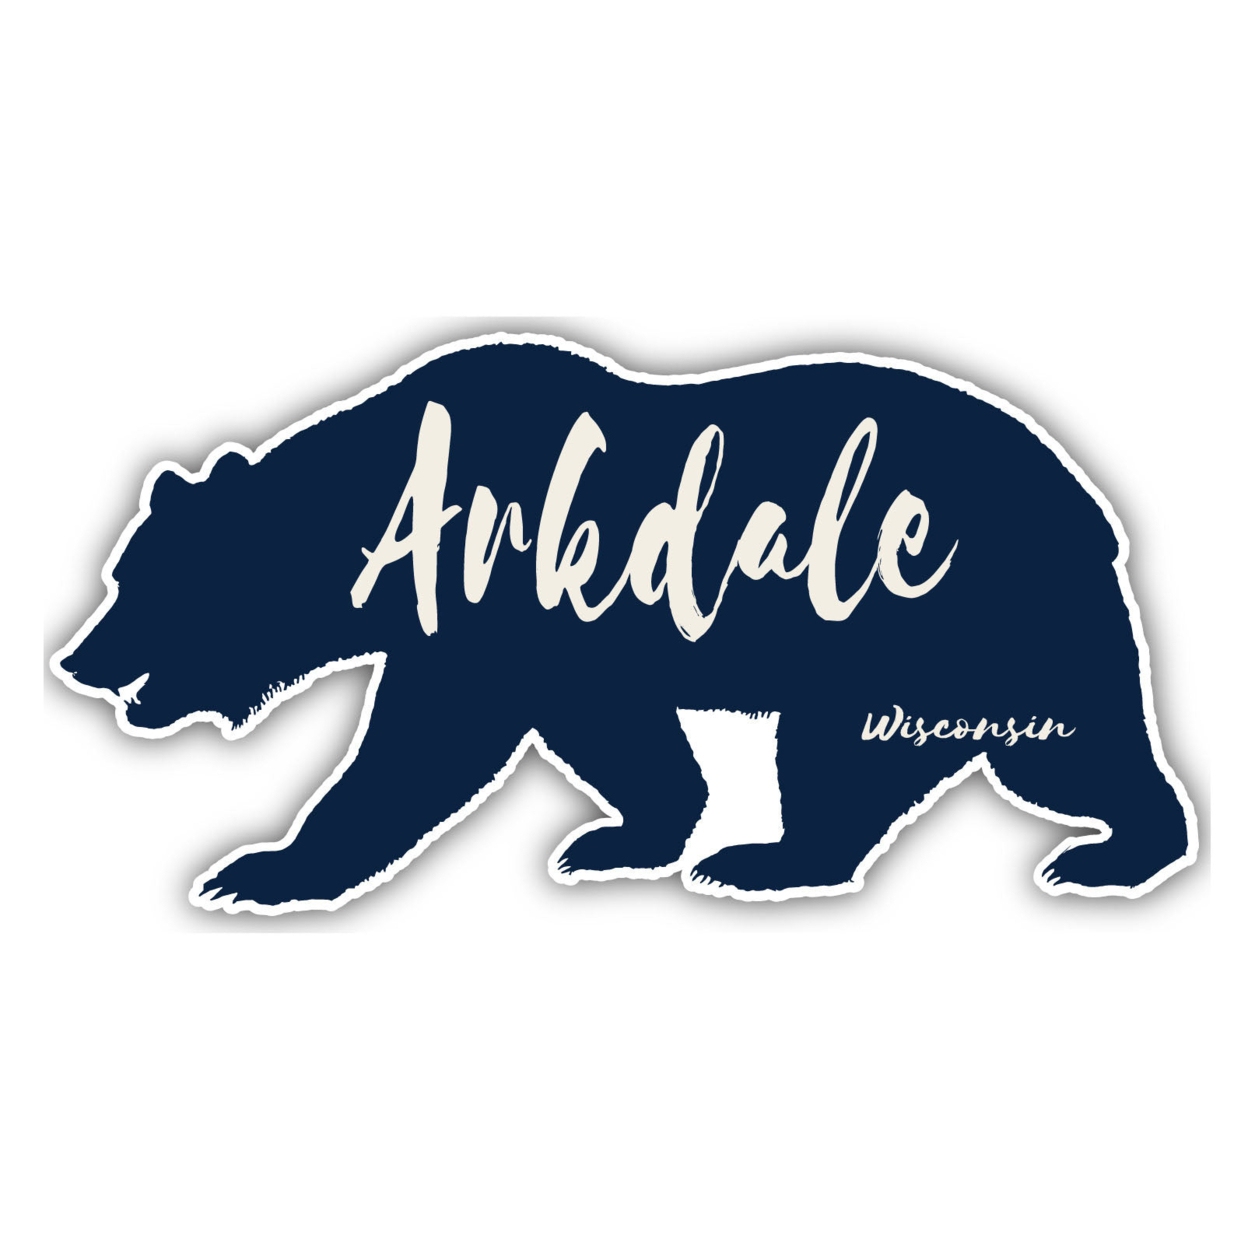 Arkdale Wisconsin Souvenir Decorative Stickers (Choose Theme And Size) - Single Unit, 8-Inch, Bear